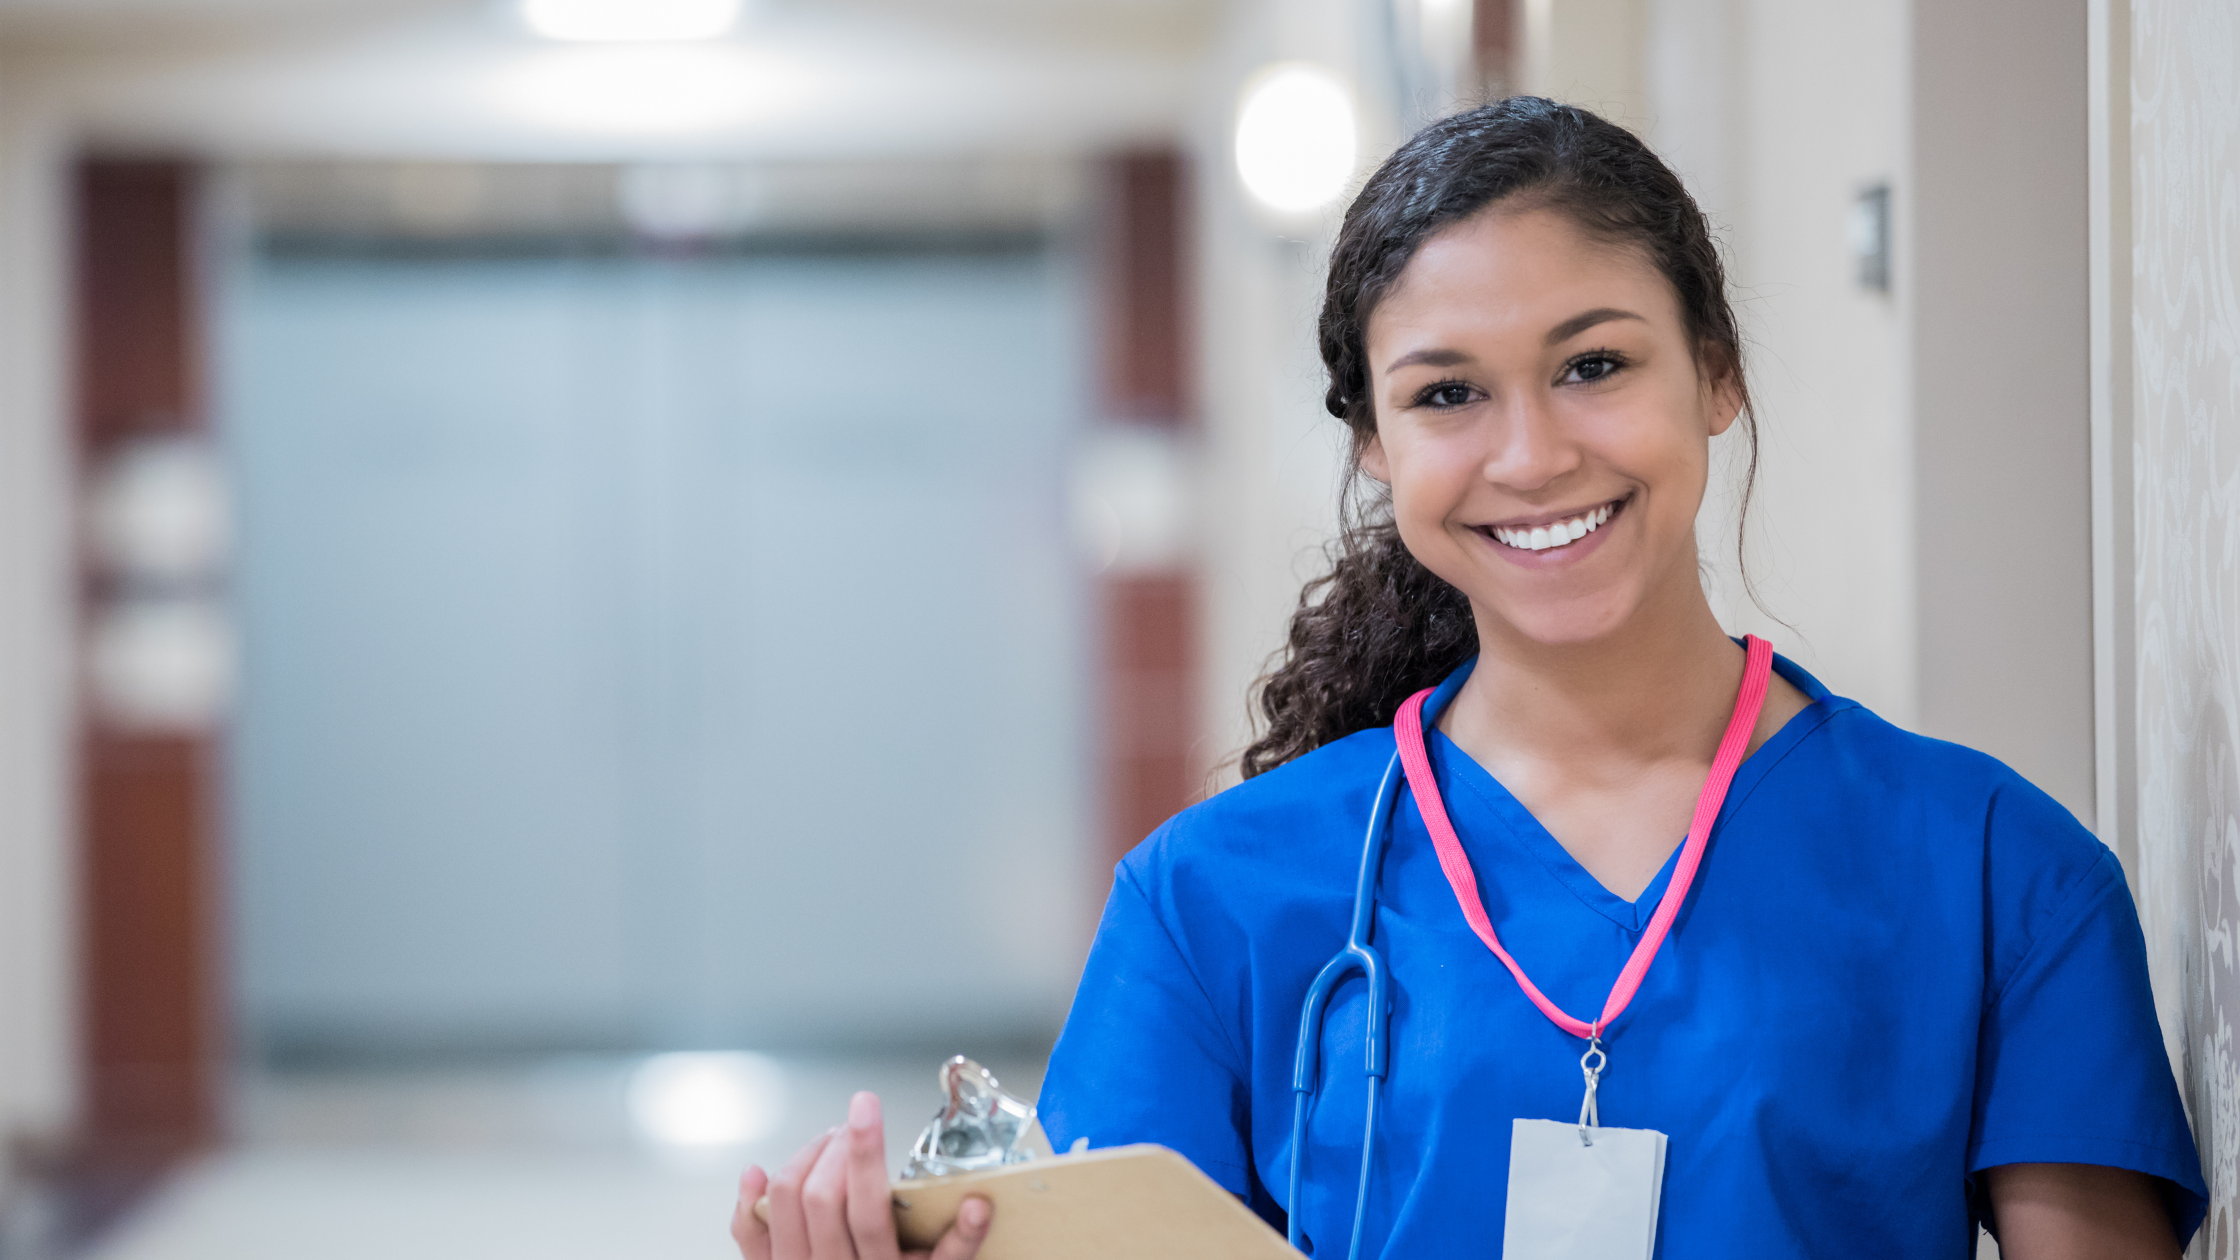 Investing in nurse well-being